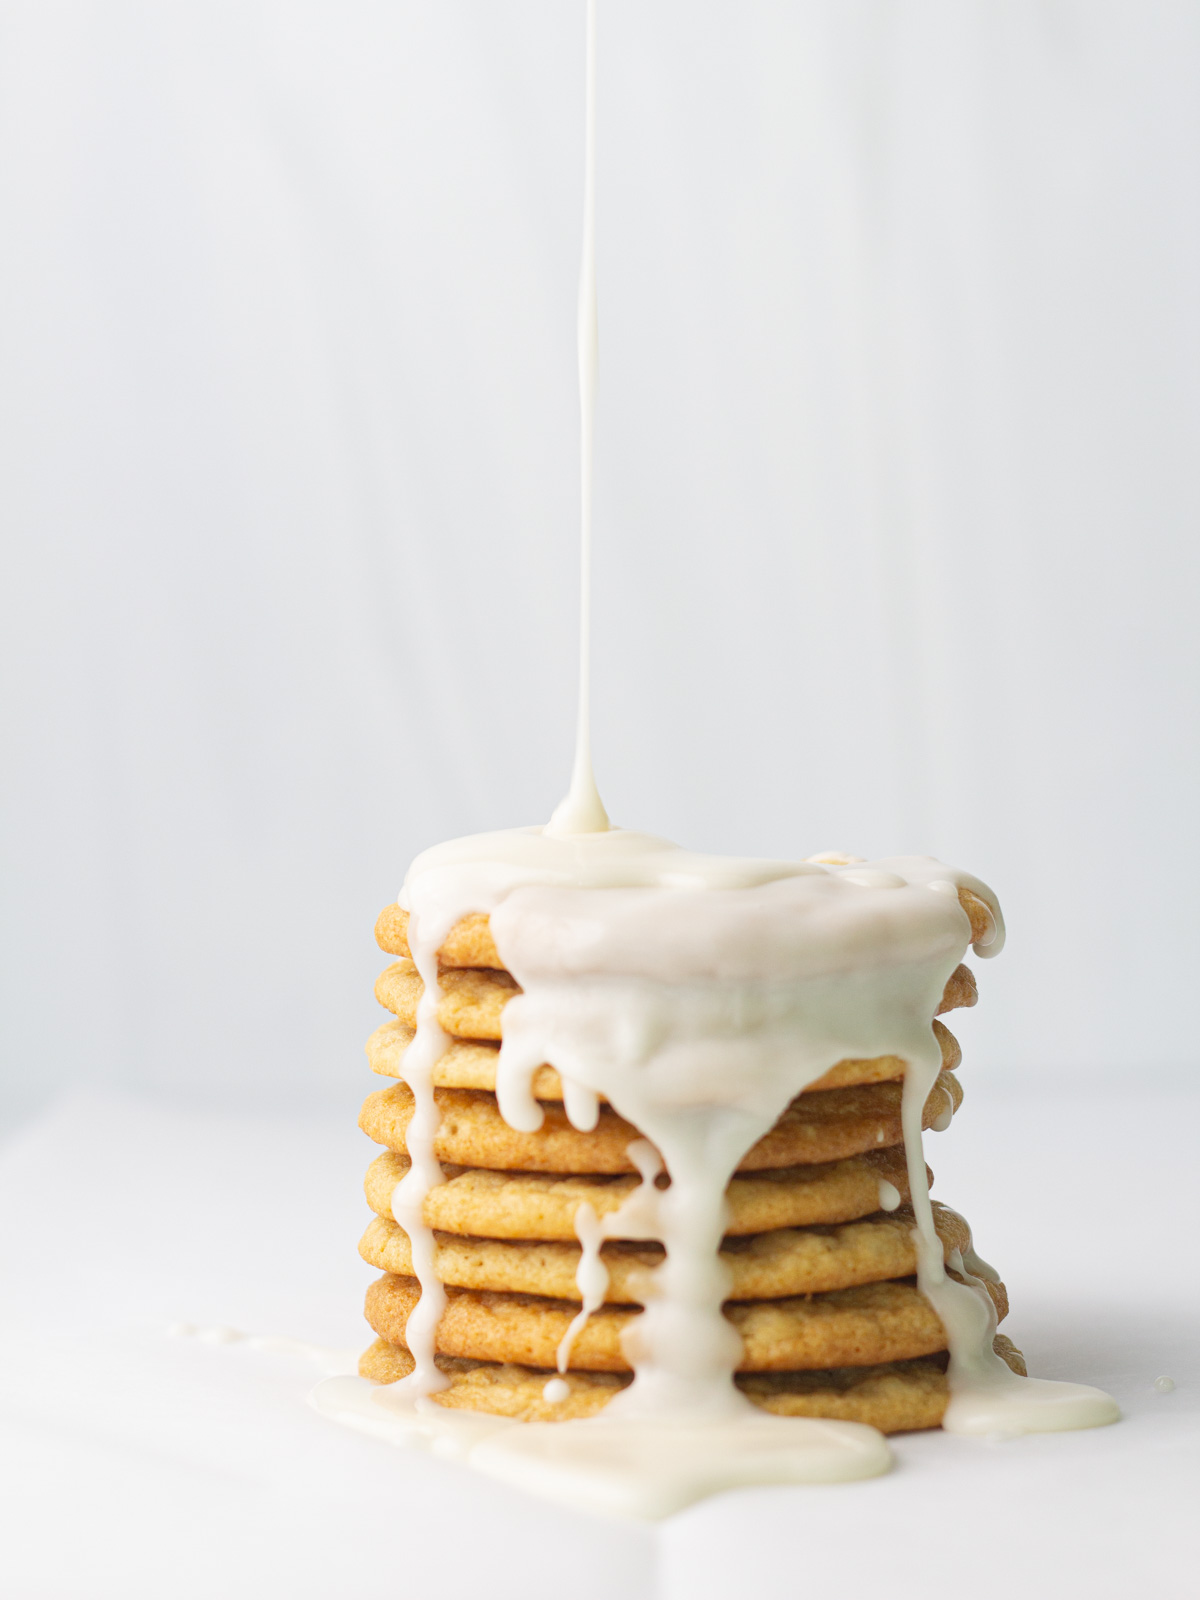 A stack of beer cookies with white icing glaze drizzling down on top and dripping down the front and sides of the stack.